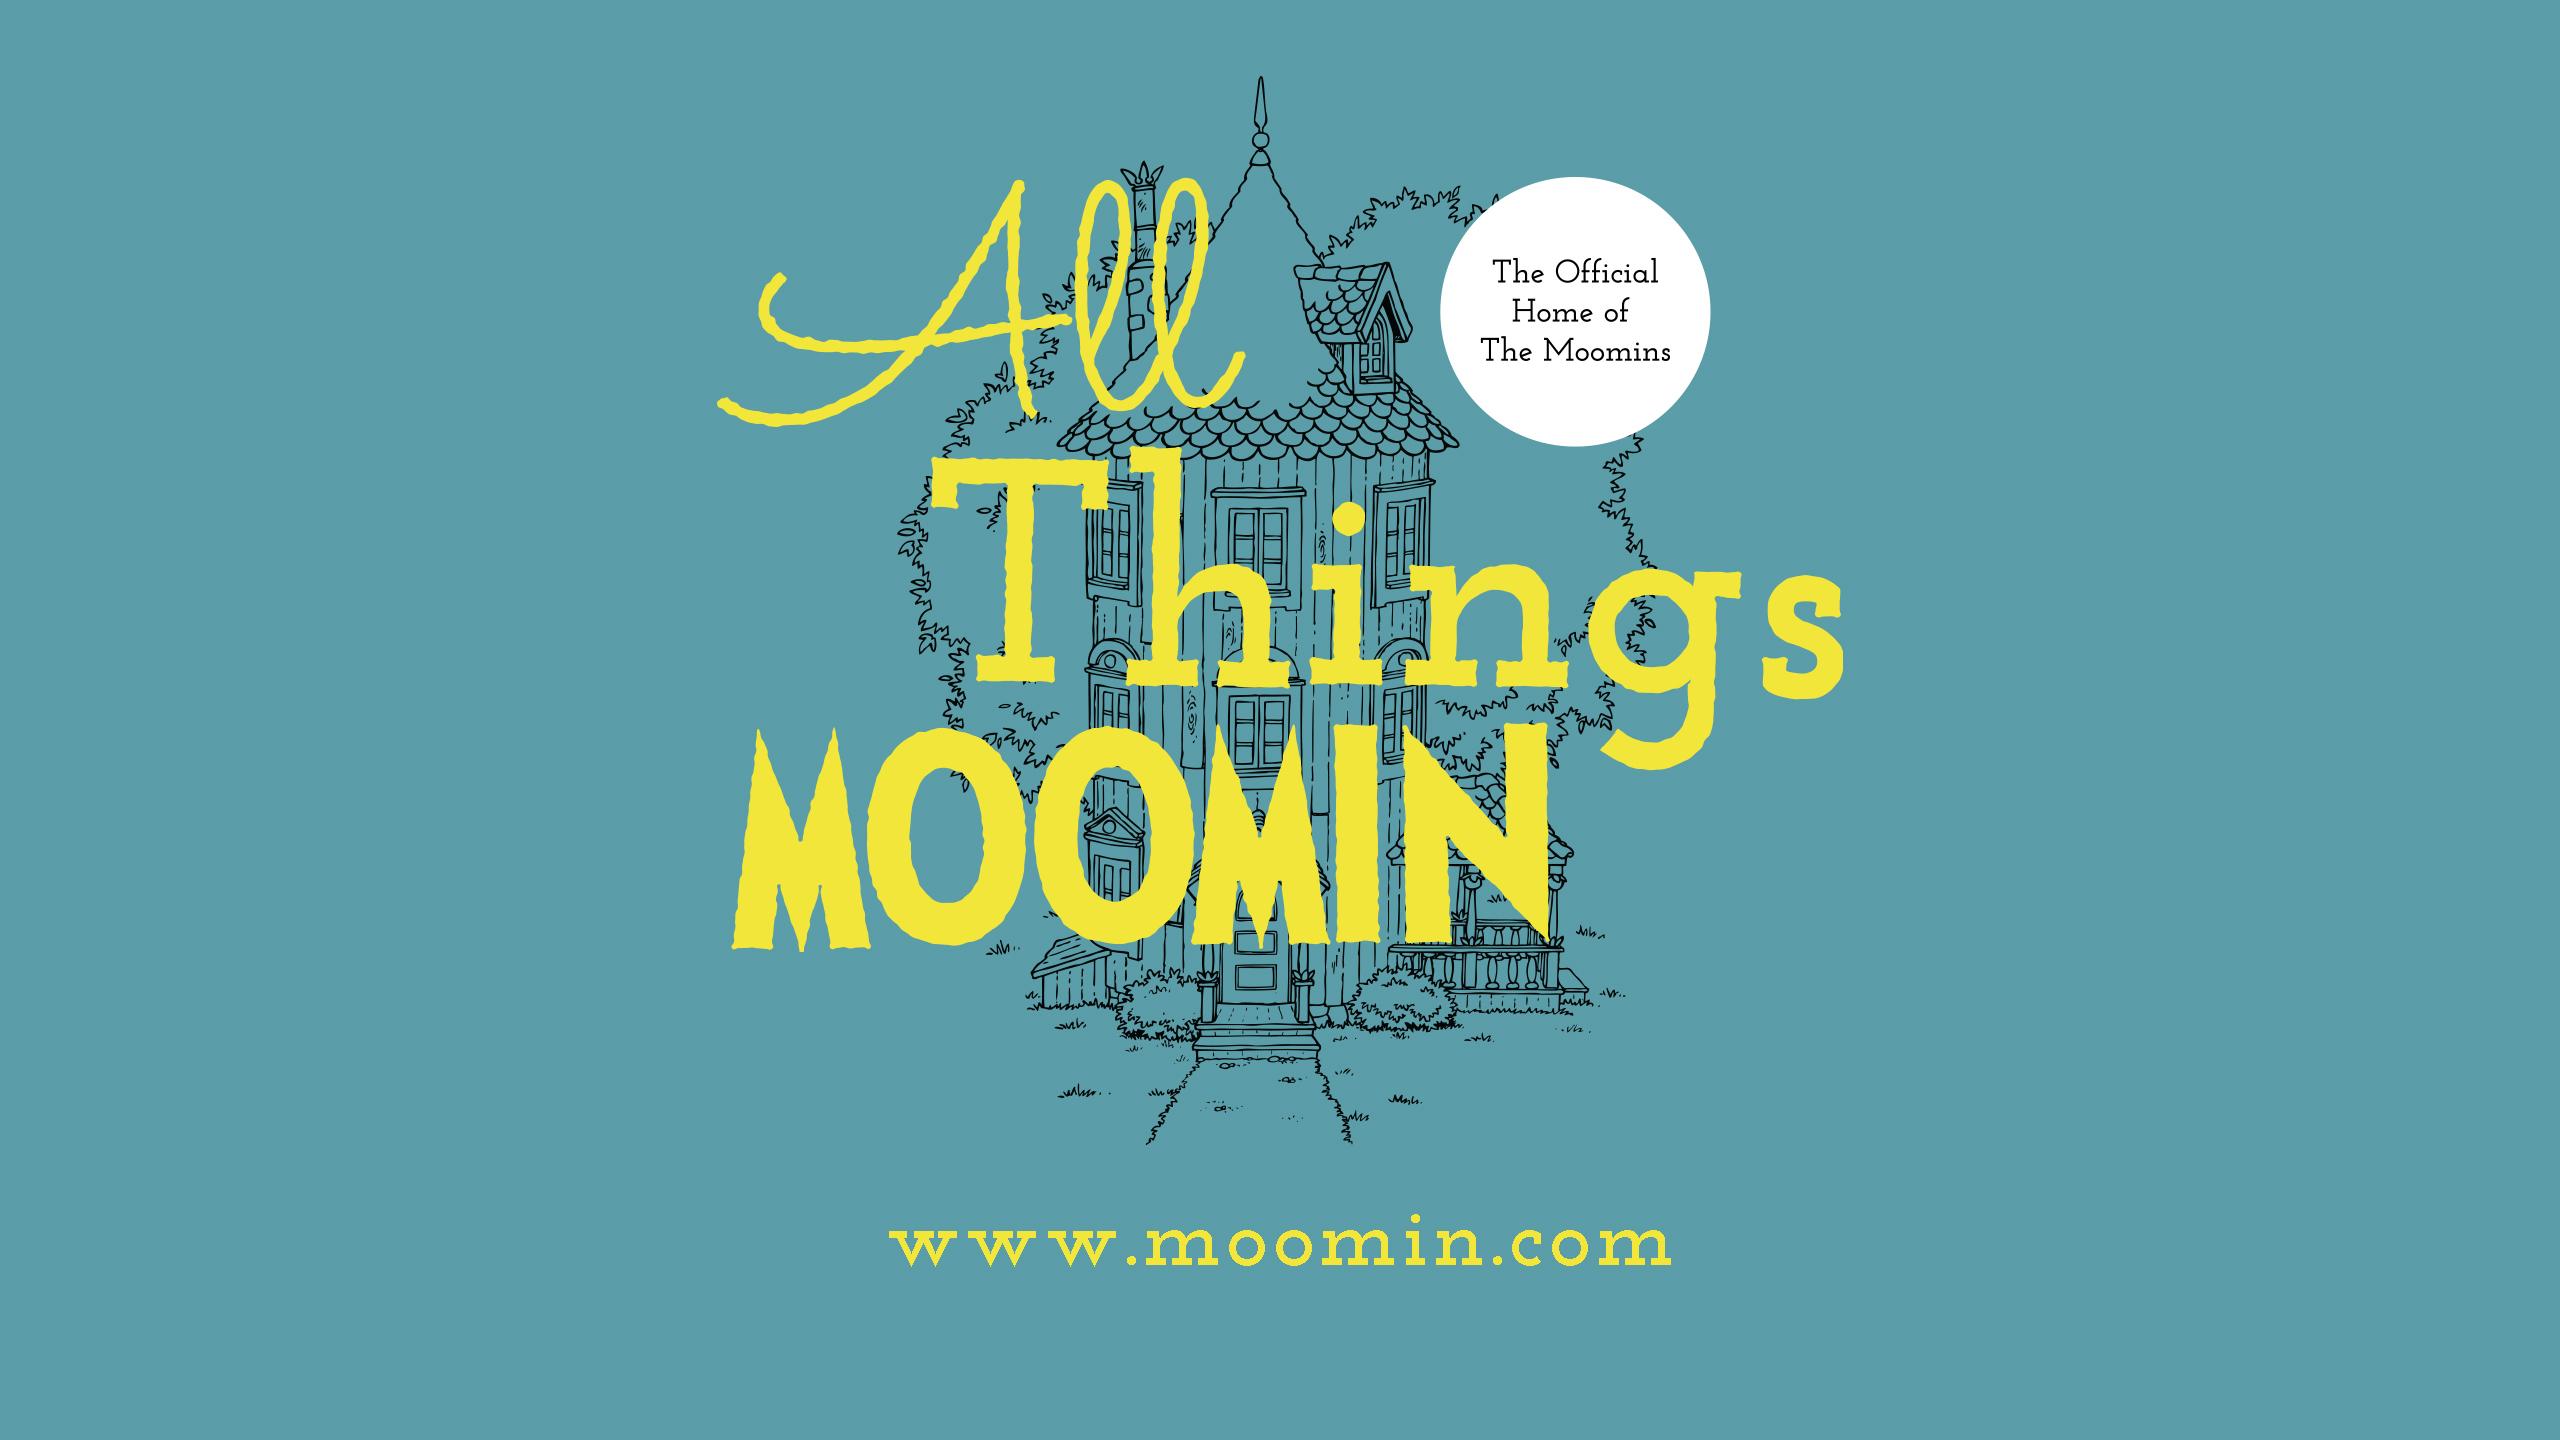 Introducing All Things Moomin's first official wallpaper